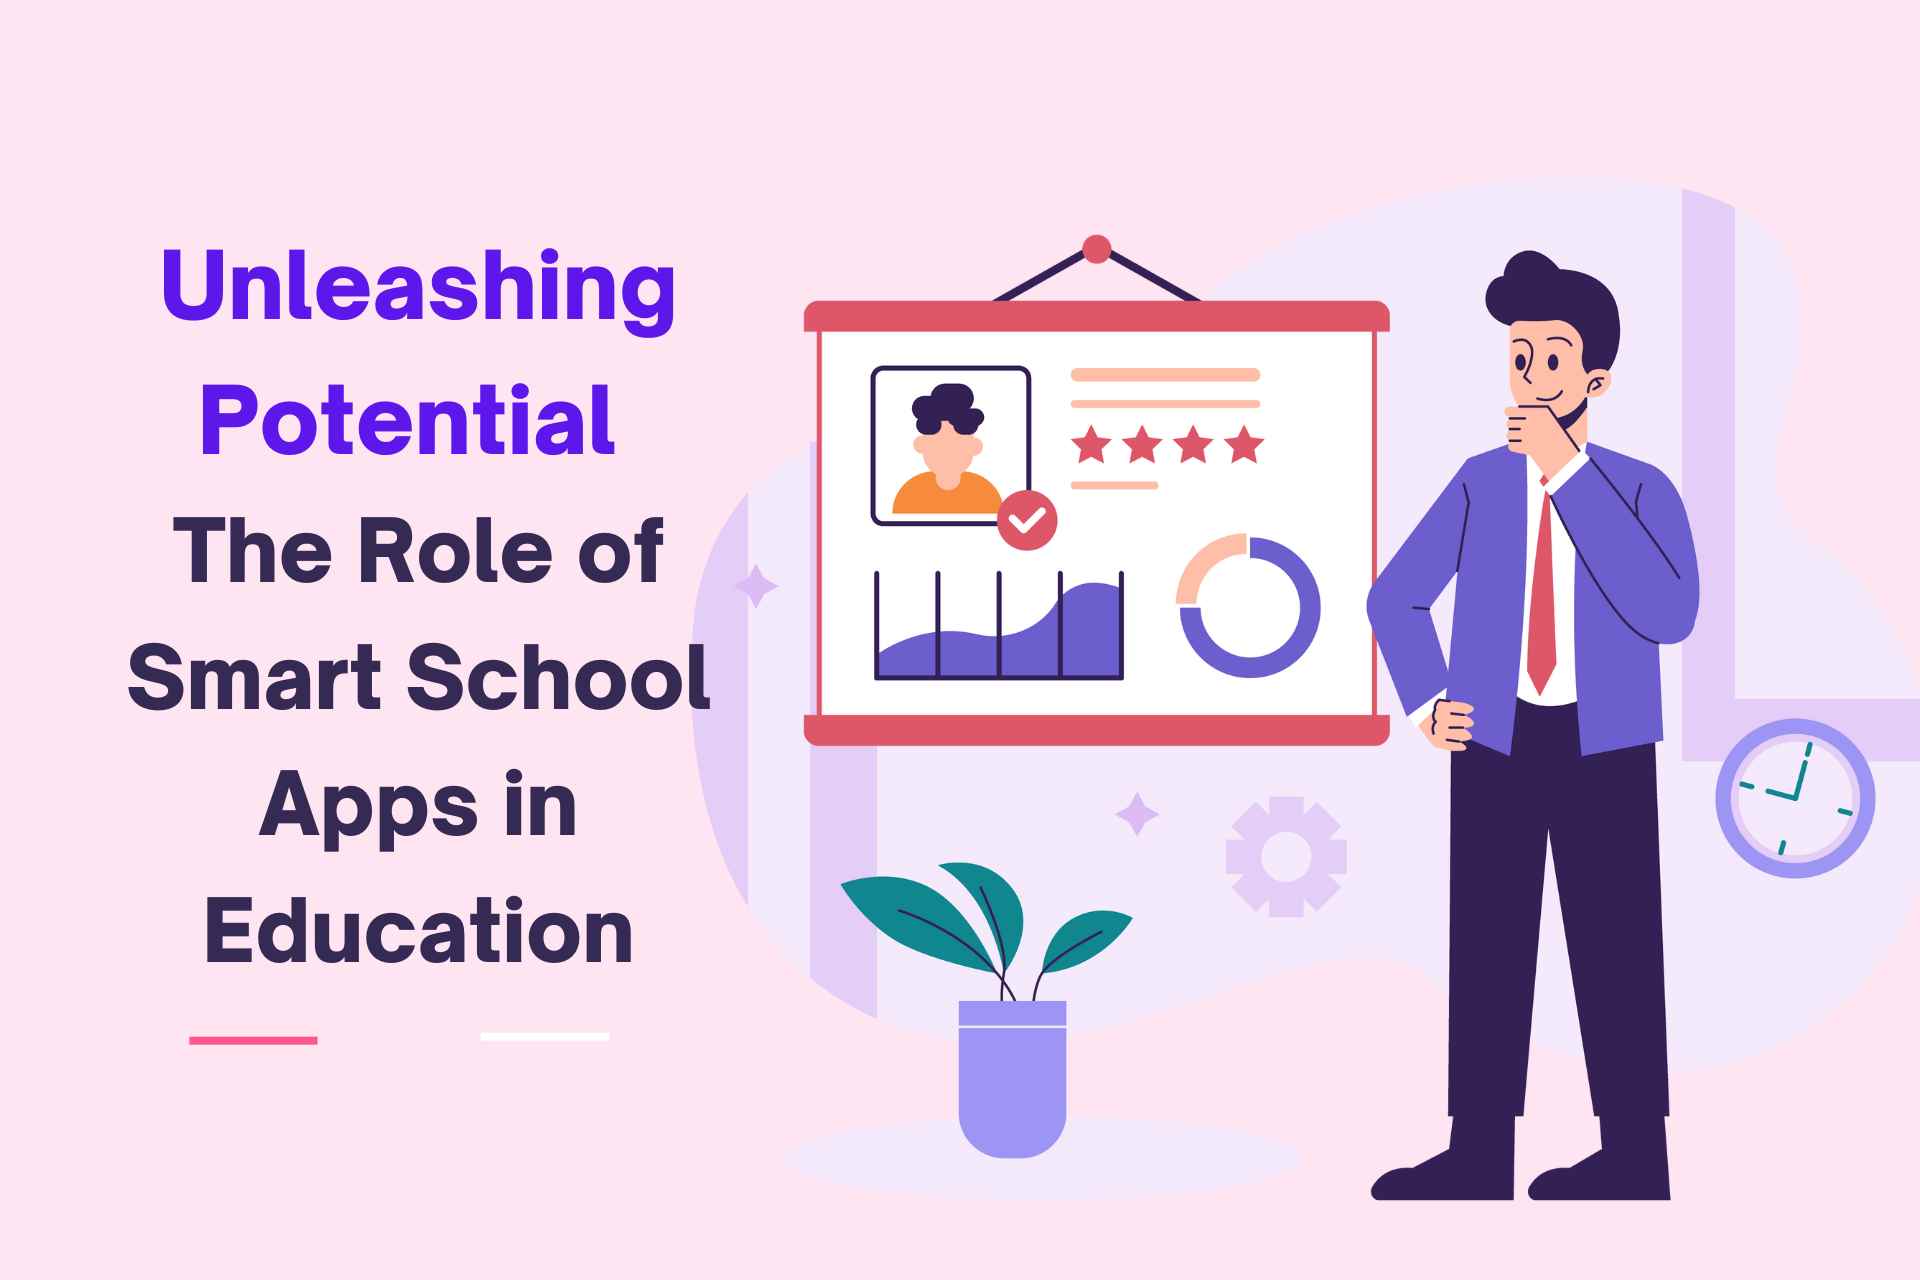 Unleashing Potential: The Role of Smart School Apps in Education